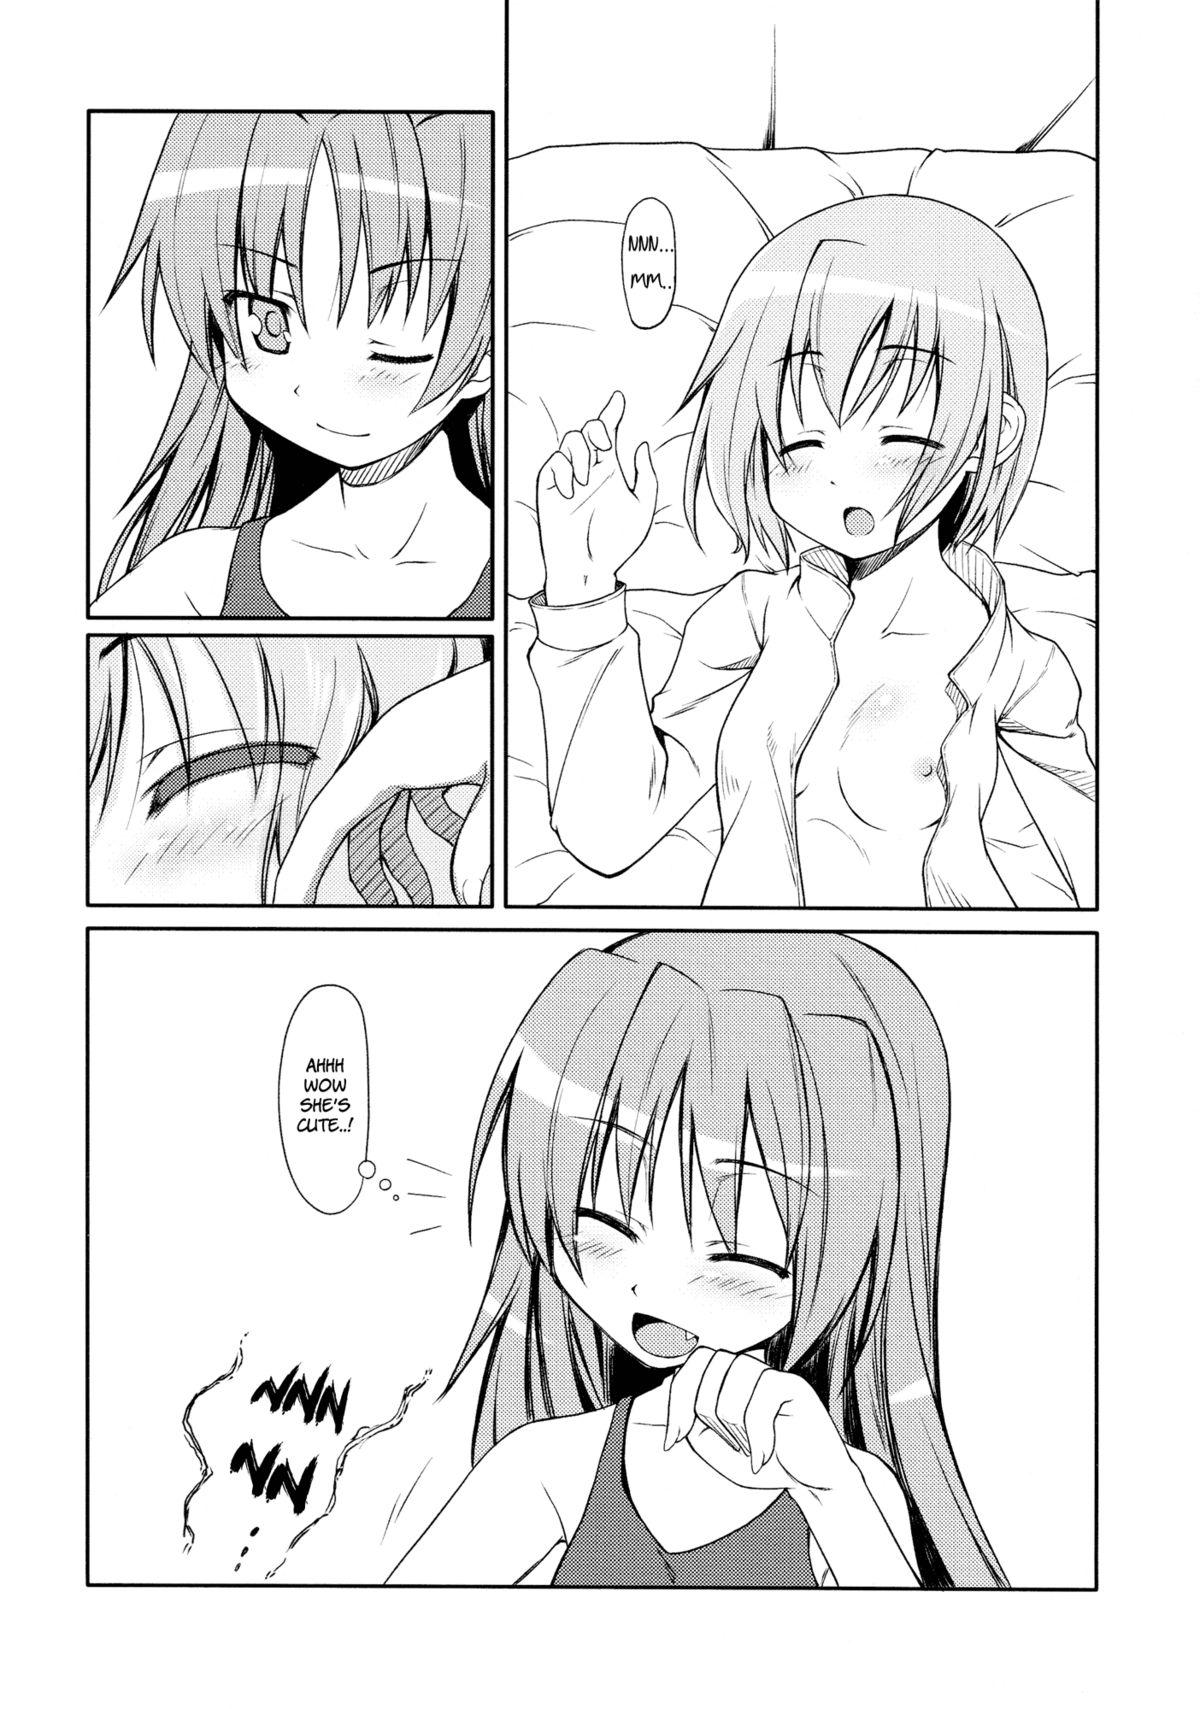 Pigtails Girls fall in love through her ears - Puella magi madoka magica Class Room - Page 9